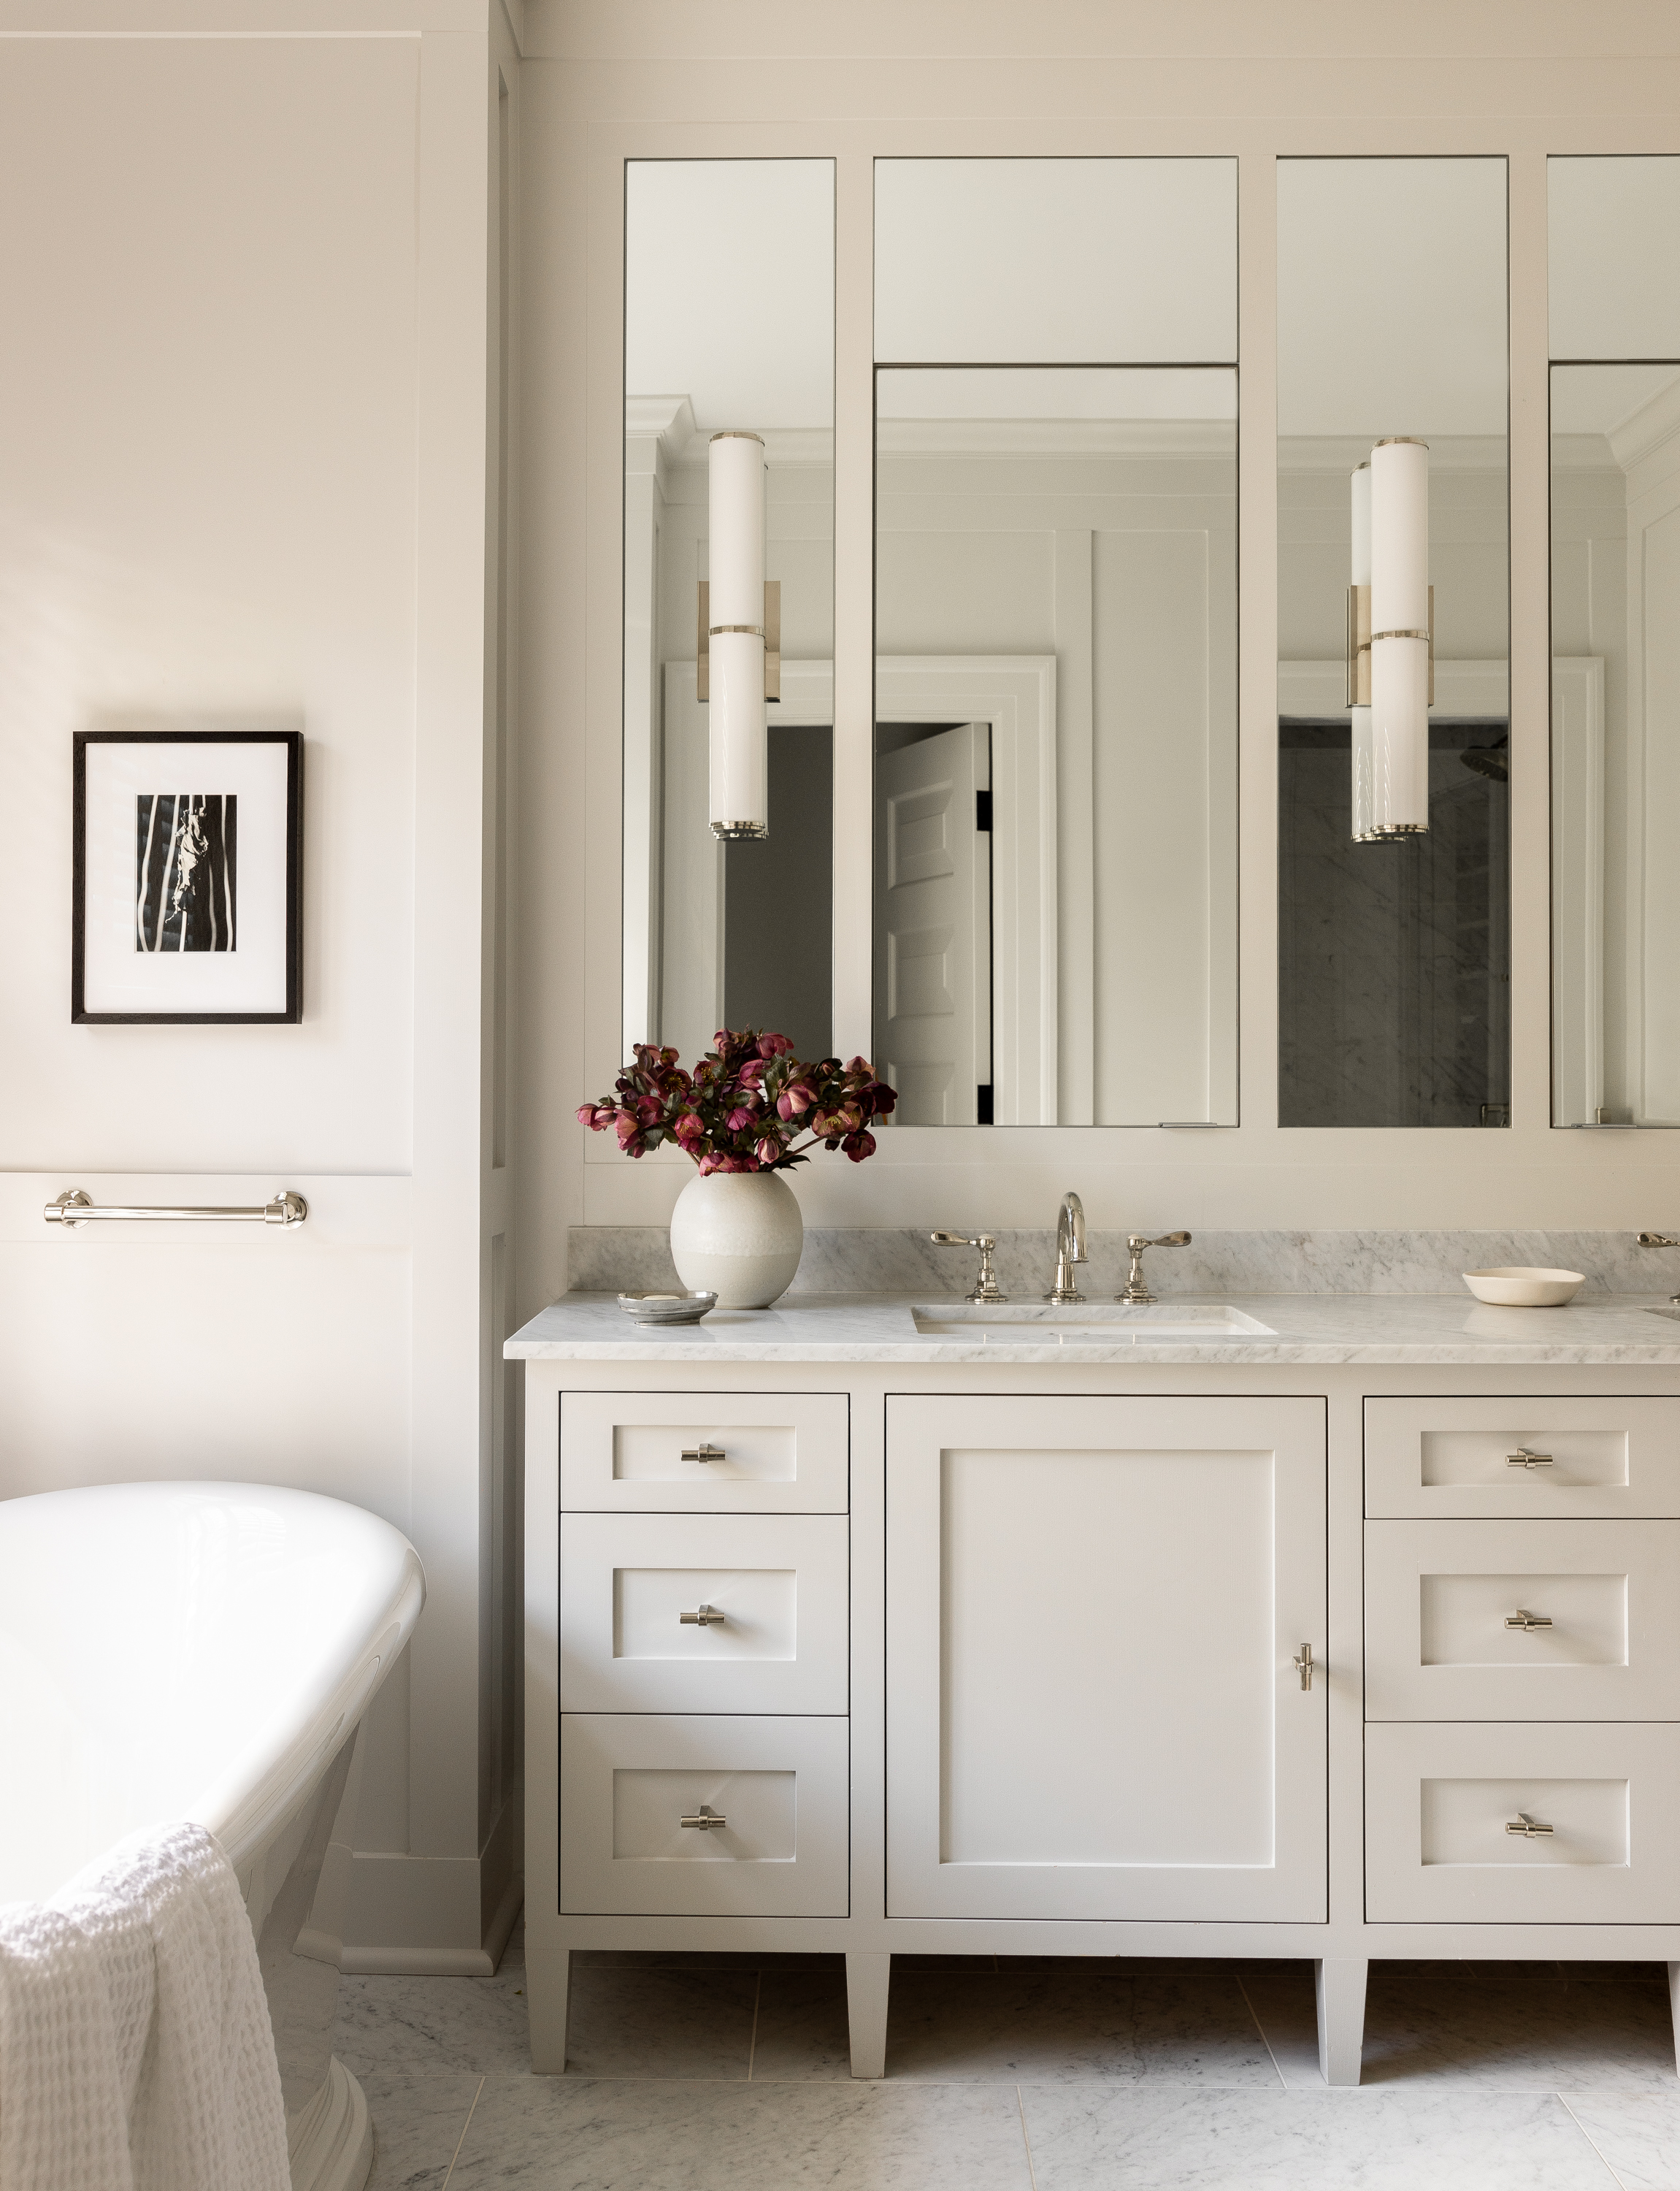 A classic and traditional bathroom vanity featuring an all-white design, chrome finishes, and vertical sconces, adding a timeless elegance.